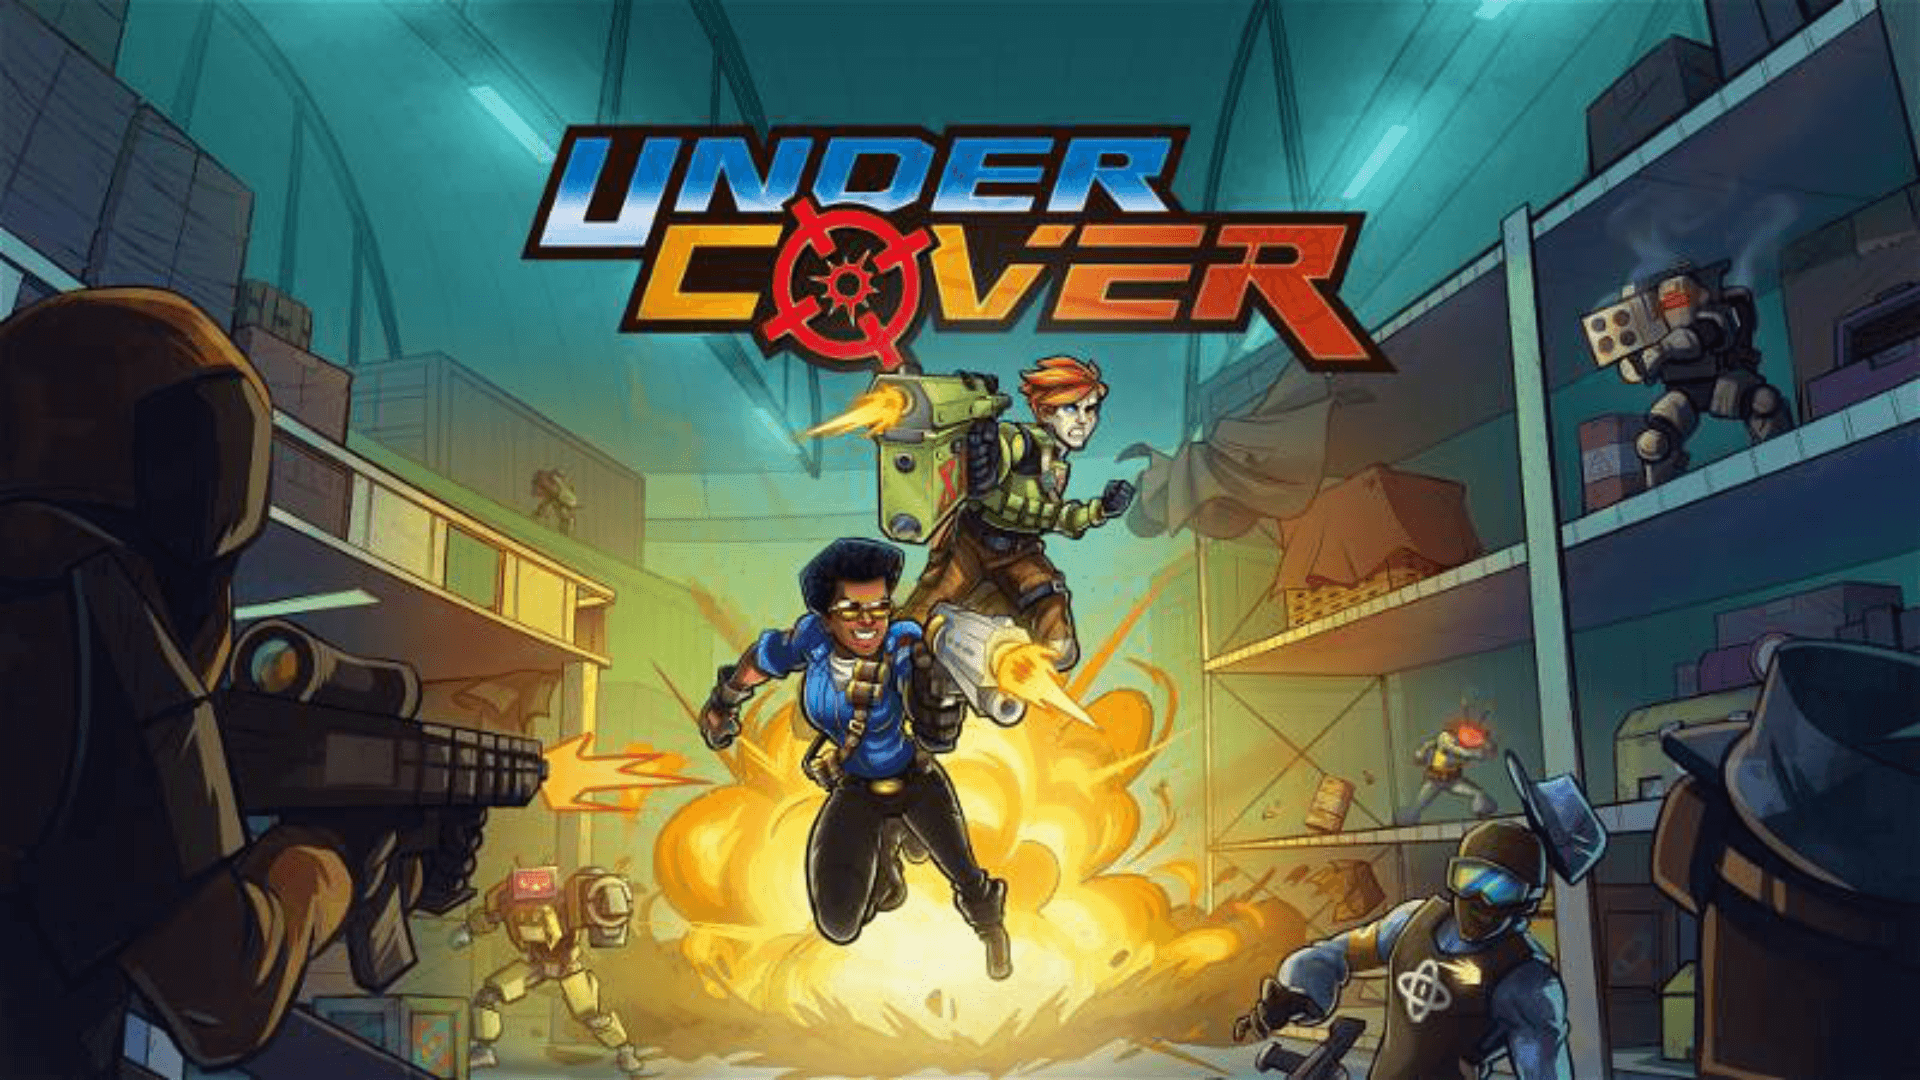 Available Now On Meta Quest Devices, Under Cover Is A VR Arcade Shooter